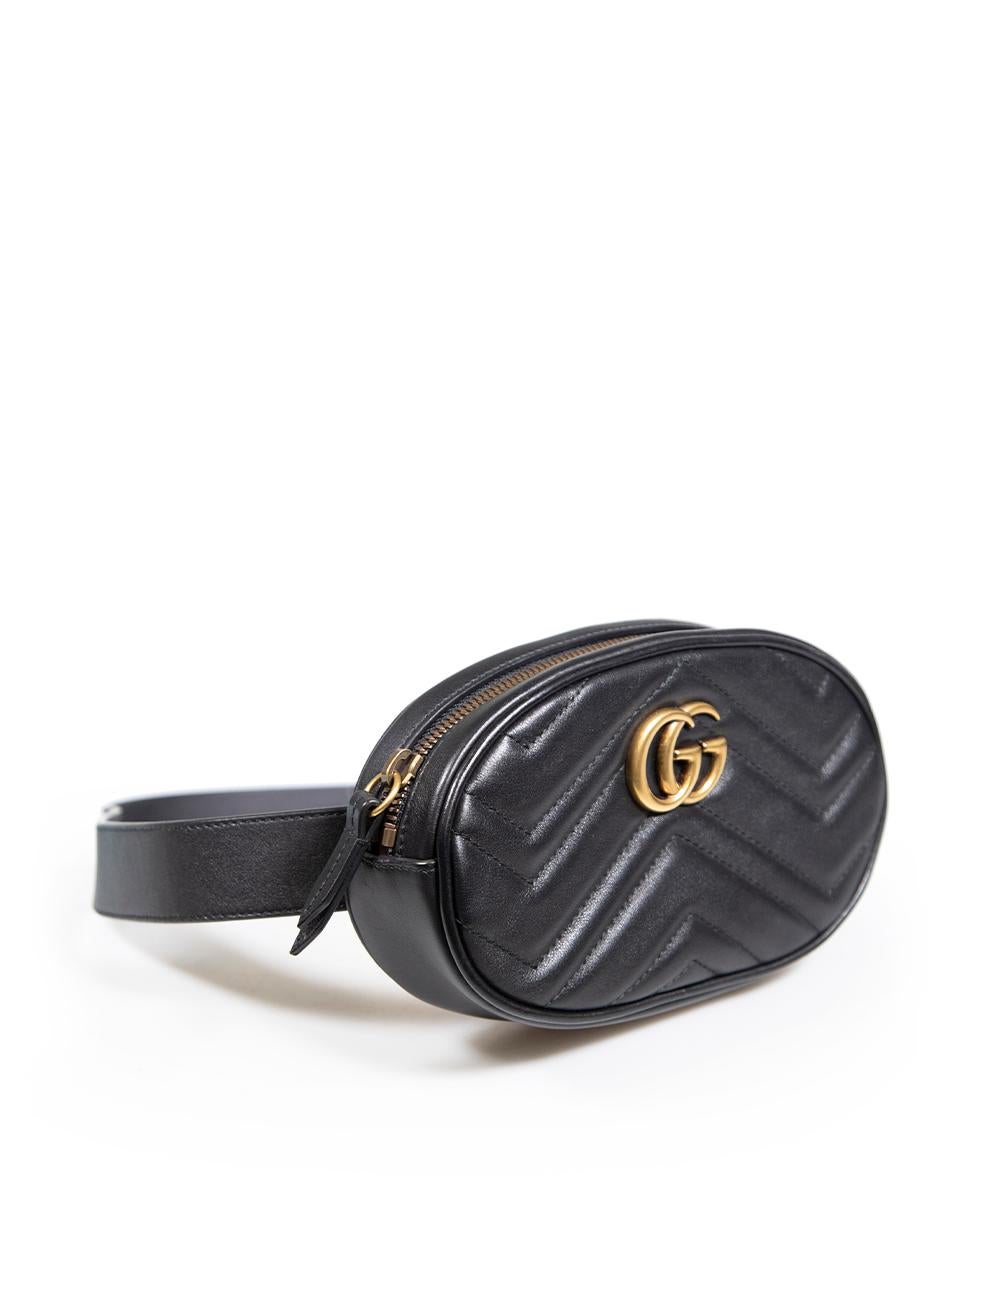 CONDITION is Very good. Minimal wear to bag is evident. Minimal light scratches to the leather strap and base on this used Gucci designer resale item.
 
 
 
 Details
 
 
 Model: GG Marmont
 
 Black
 
 Leather
 
 Mini belt bag
 
 Gold logo detail
 
